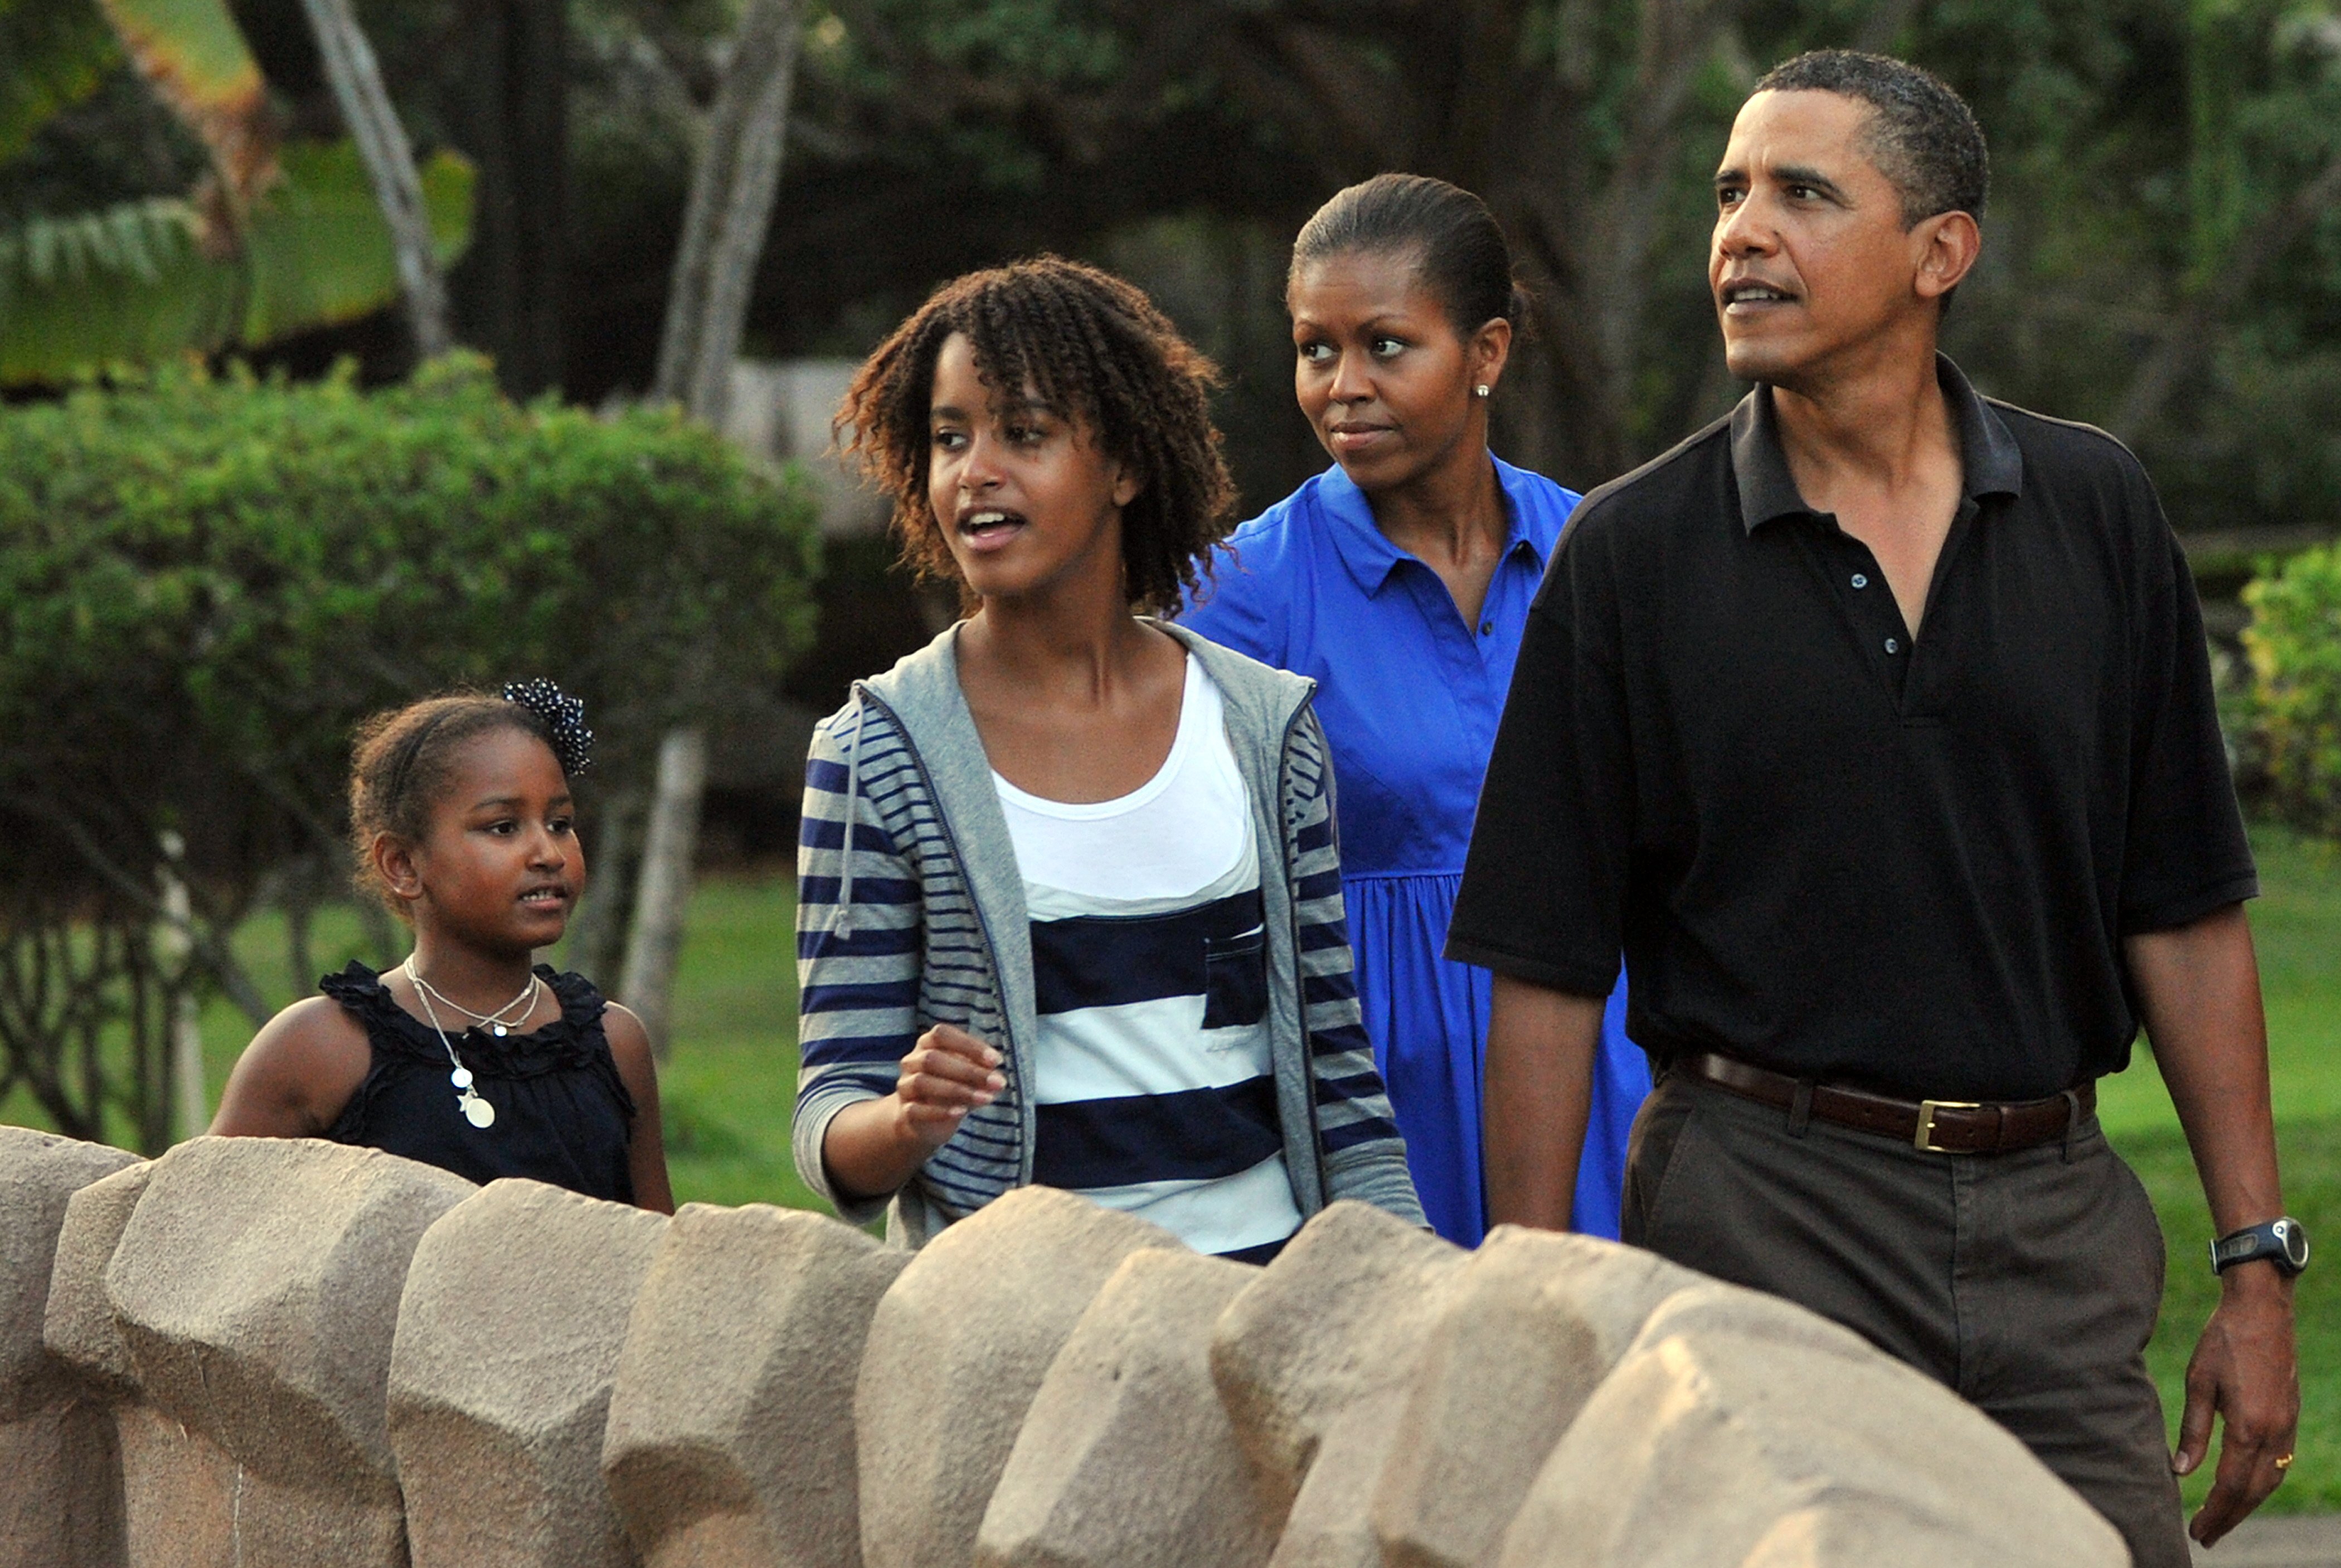 Barack Obama, Michelle Obama and their daughters Malia and Sasha visit the zoo in Honolulu on January 3, 2010 | Source: Getty Images